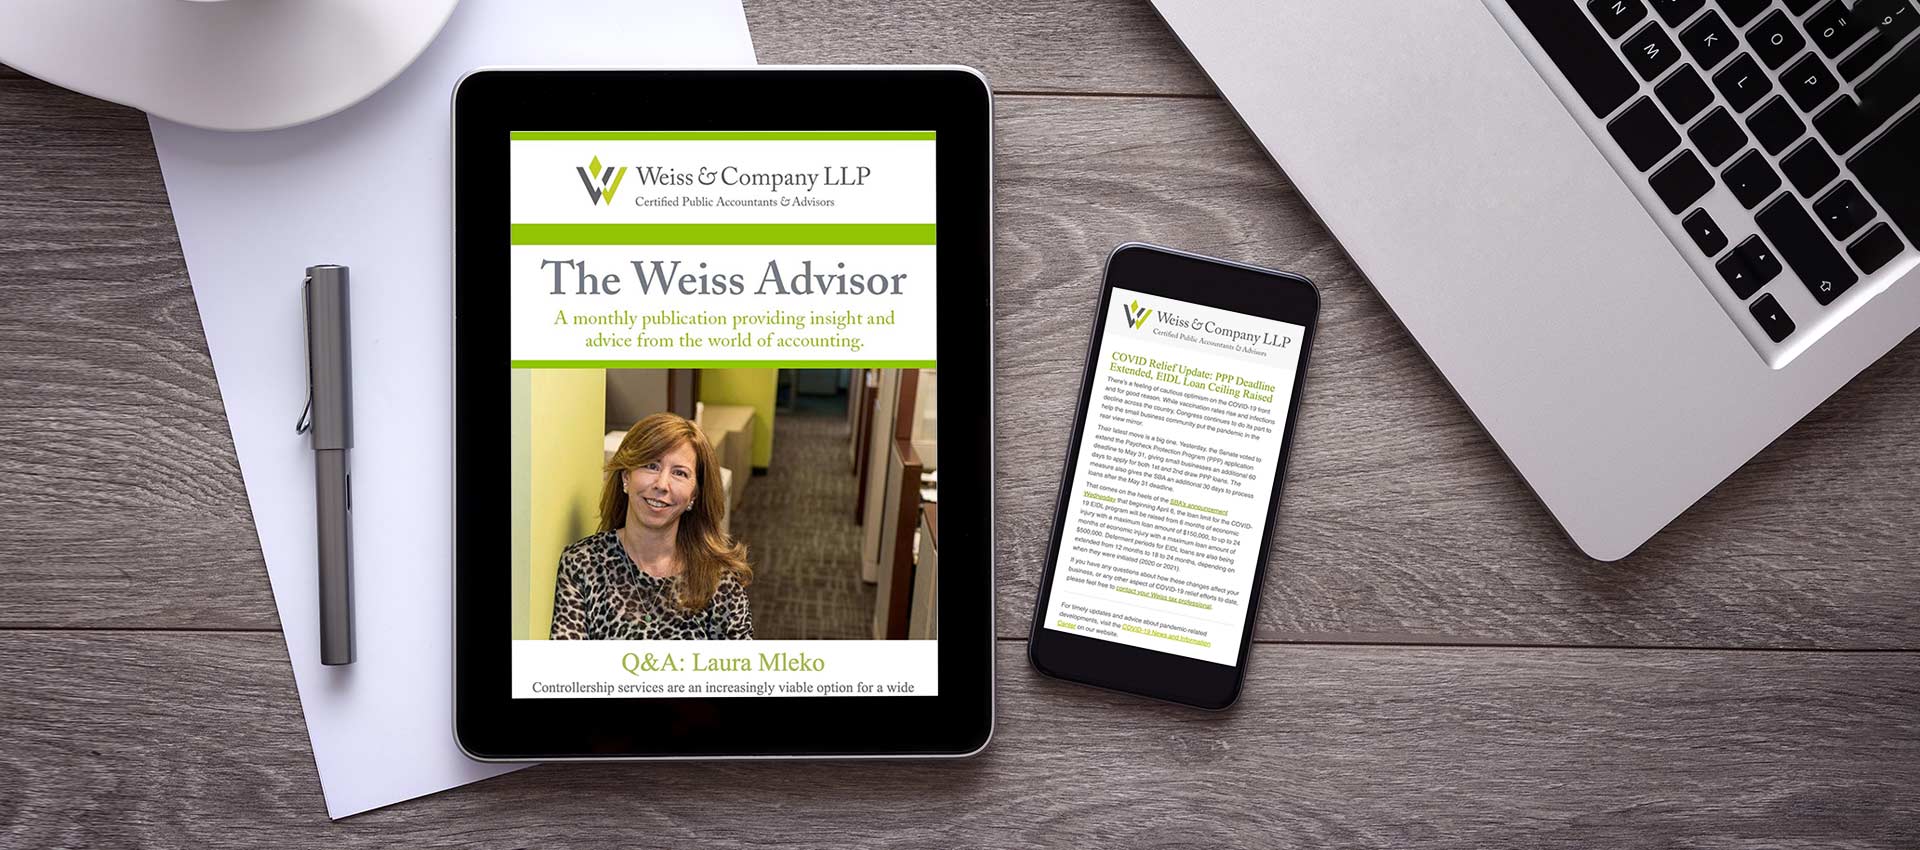 Desk with computer devices showing Weiss & Company LLP Email Marketing Examples